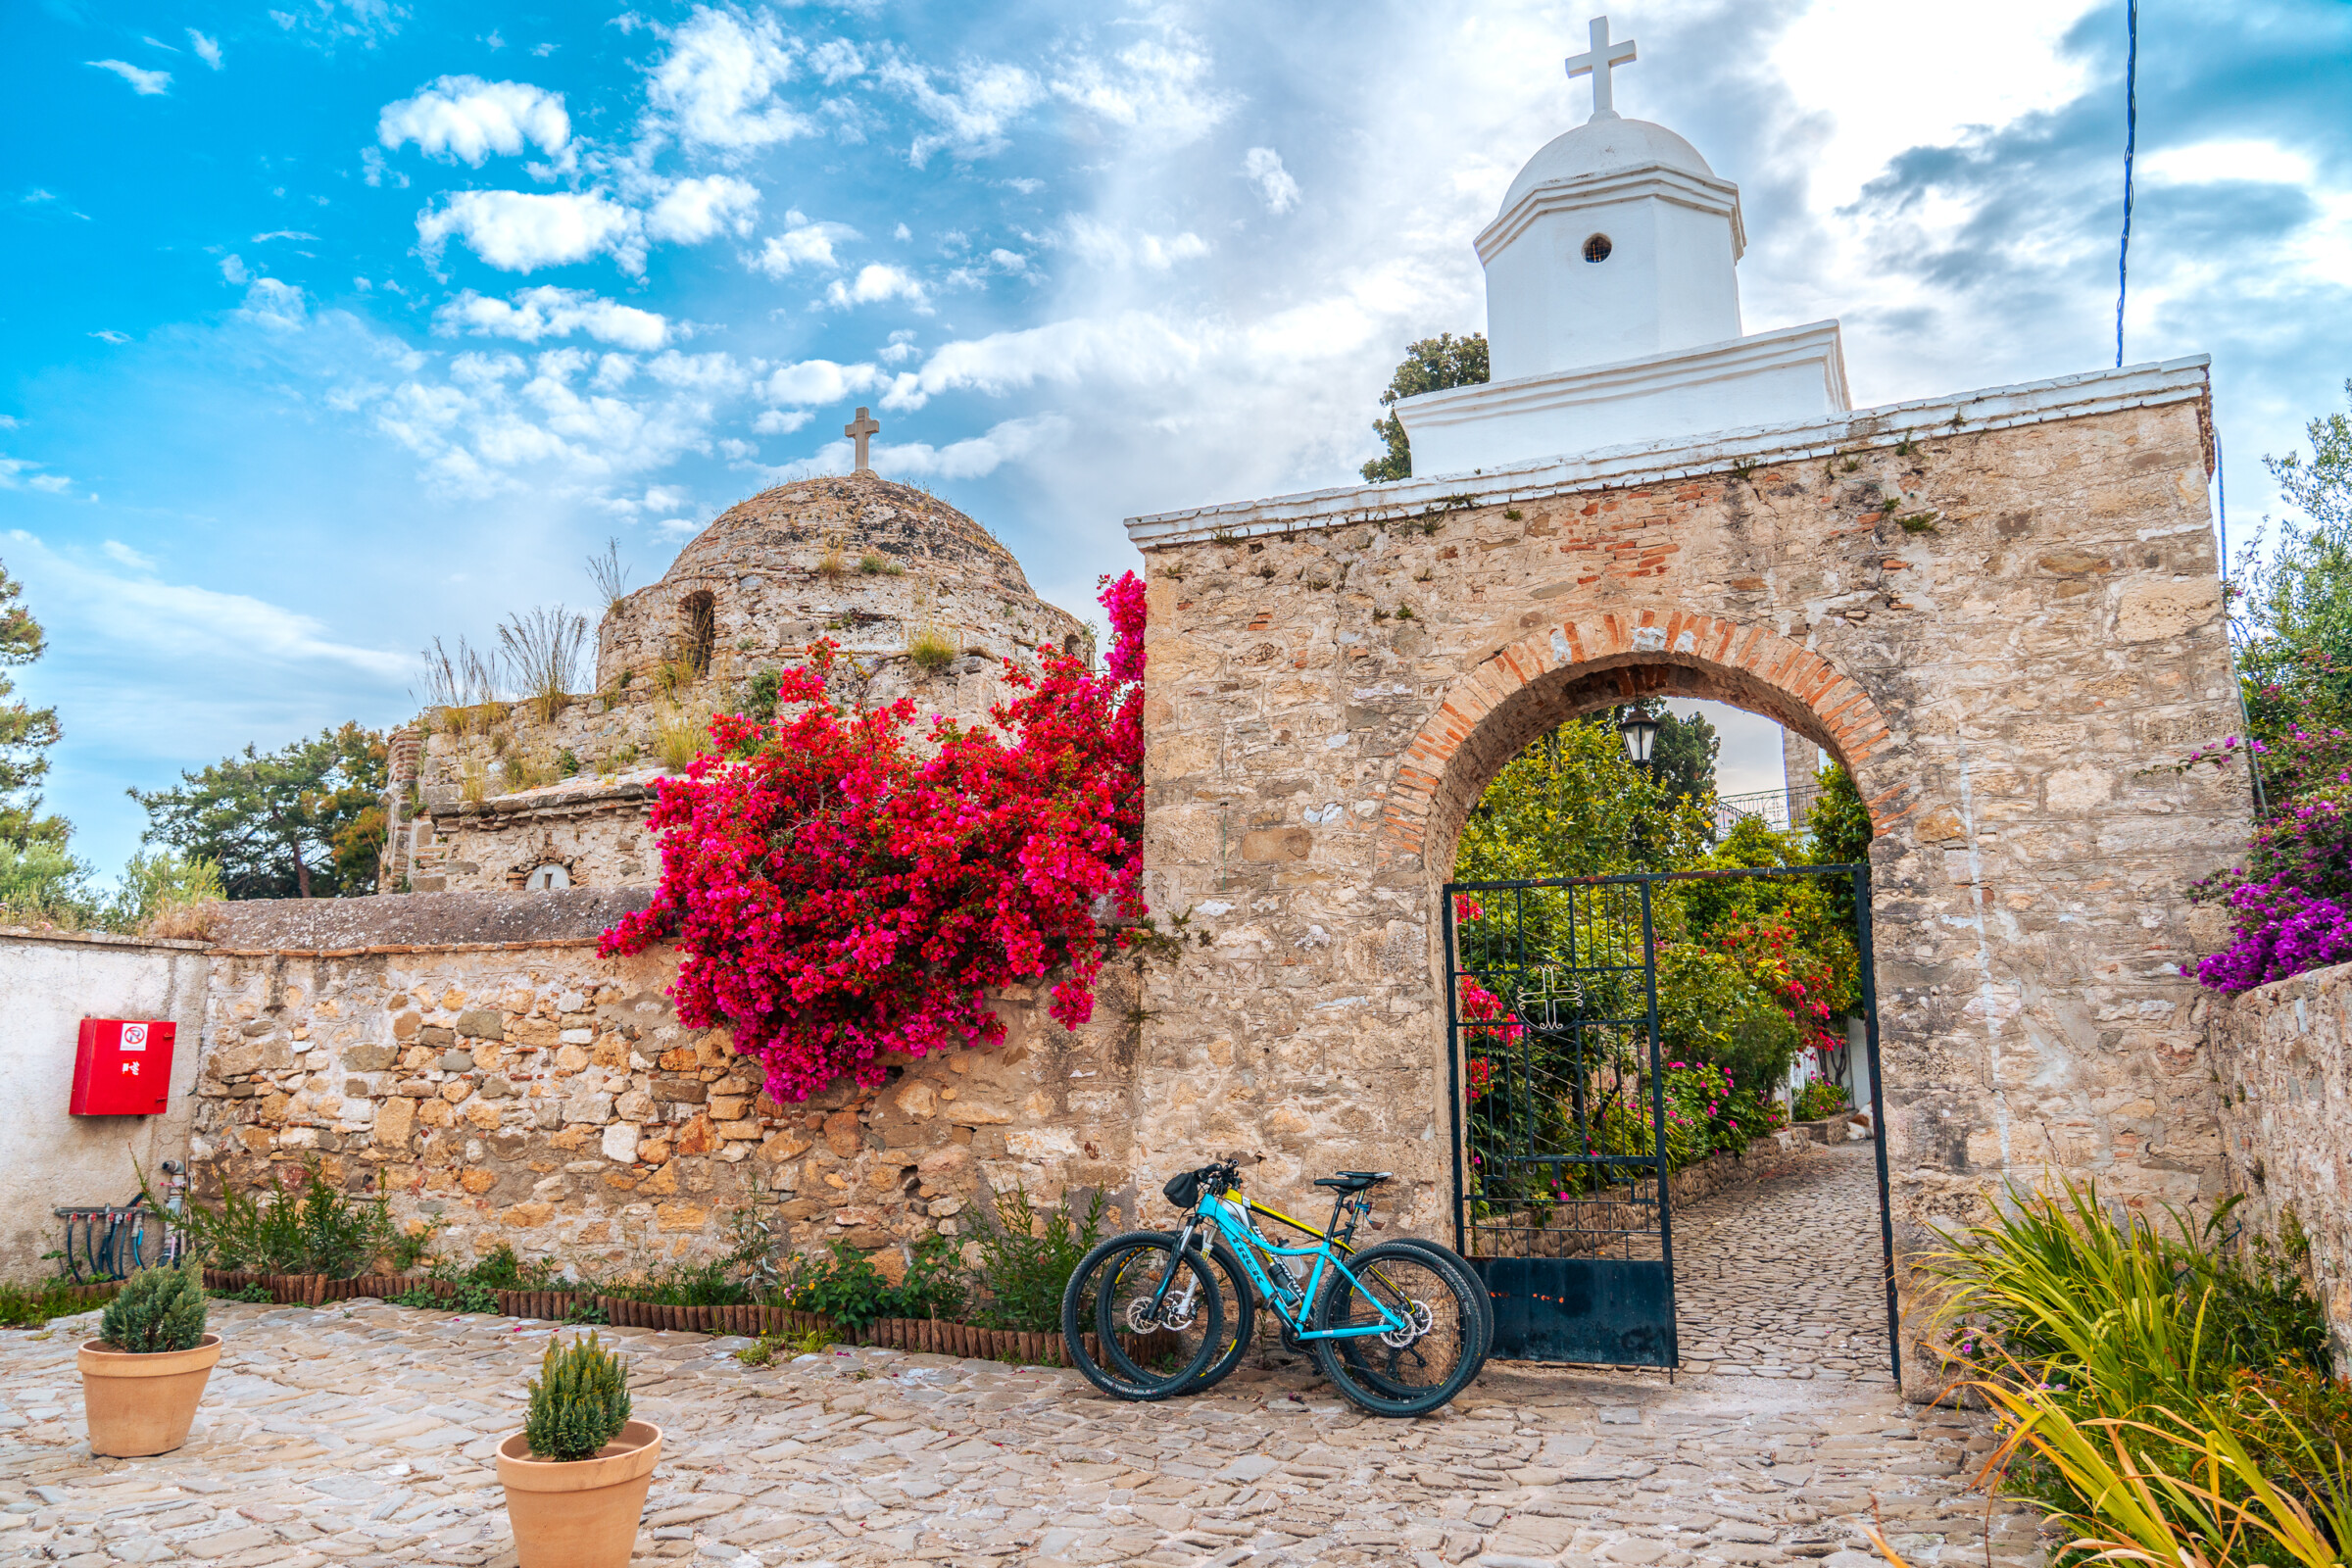 This image shows the castle gate with a brightly coloured bougainvillea. There are also two bicycles by the stone wall. 